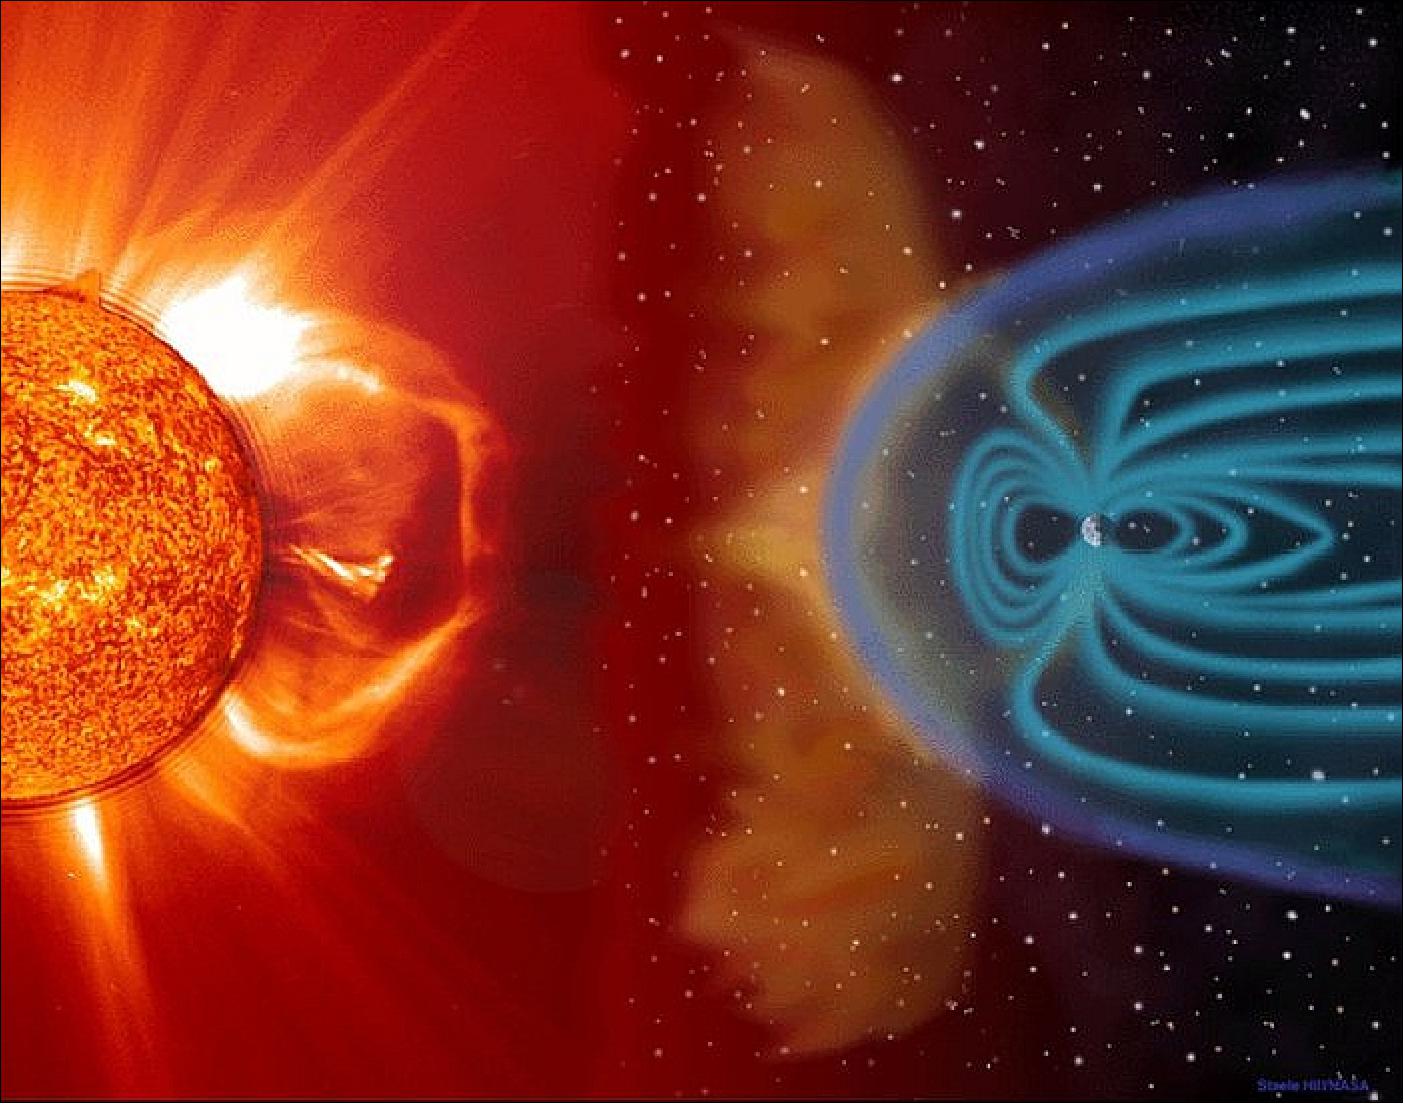 Figure 42: This composite image shows a SOHO image of the Sun and an artist's impression of Earth's magnetosphere (image credit: The Sun-Earth connection. Magnetosphere: NASA, the Sun: ESA/NASA - SOHO)